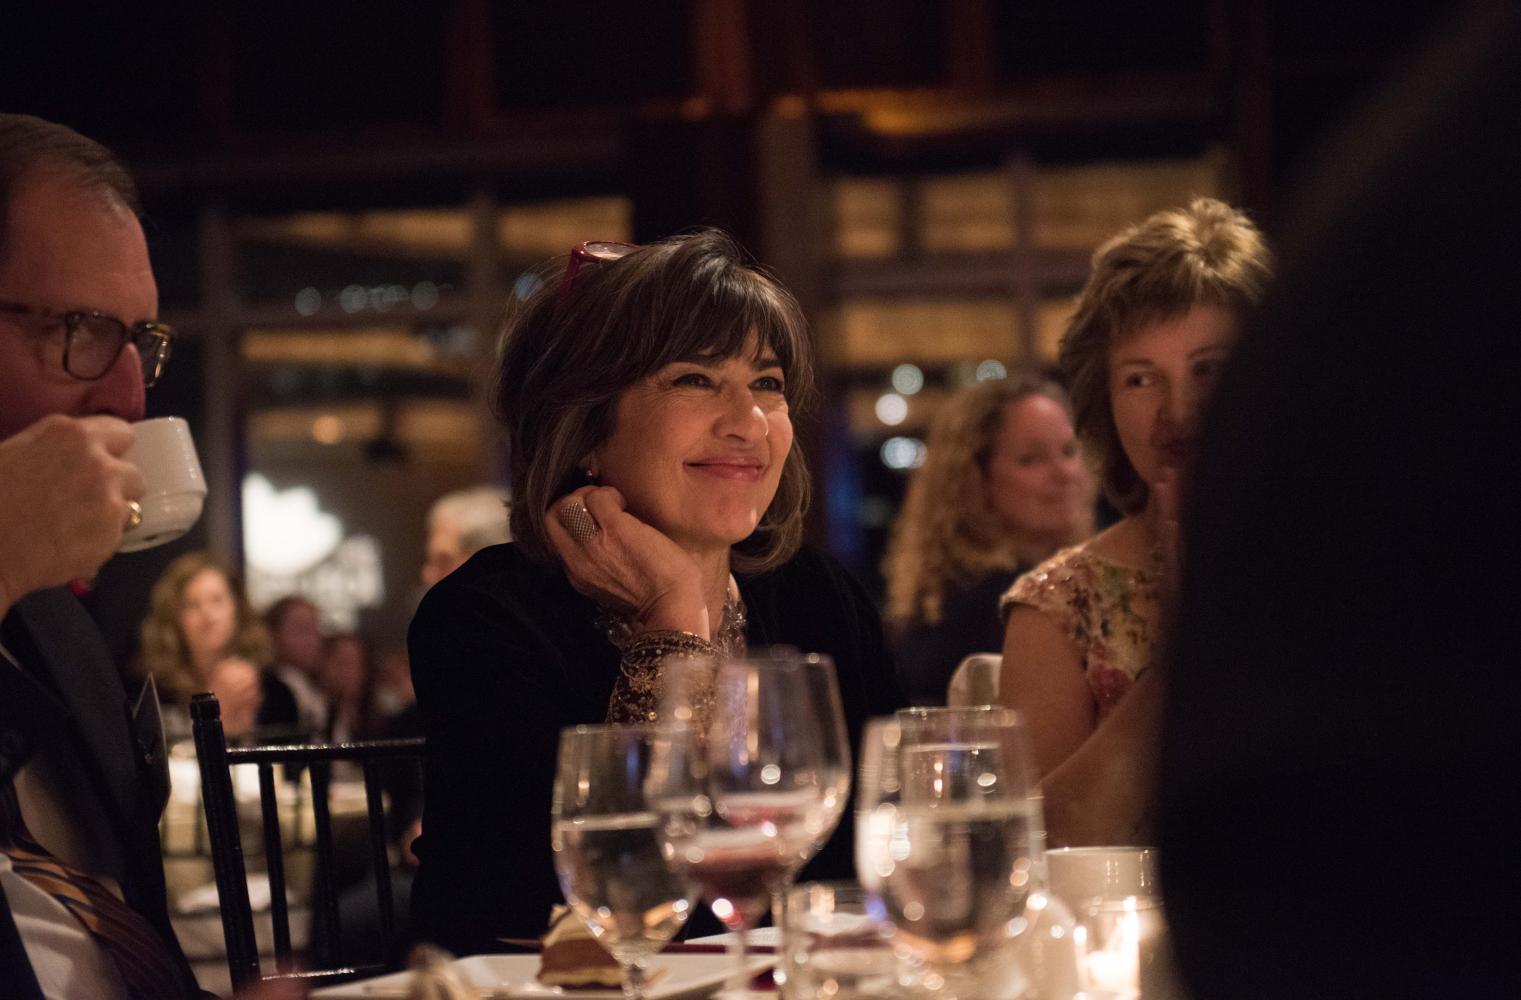 Award-winning journalist and honoree Christiane Amanpour smiles while looking at crowd